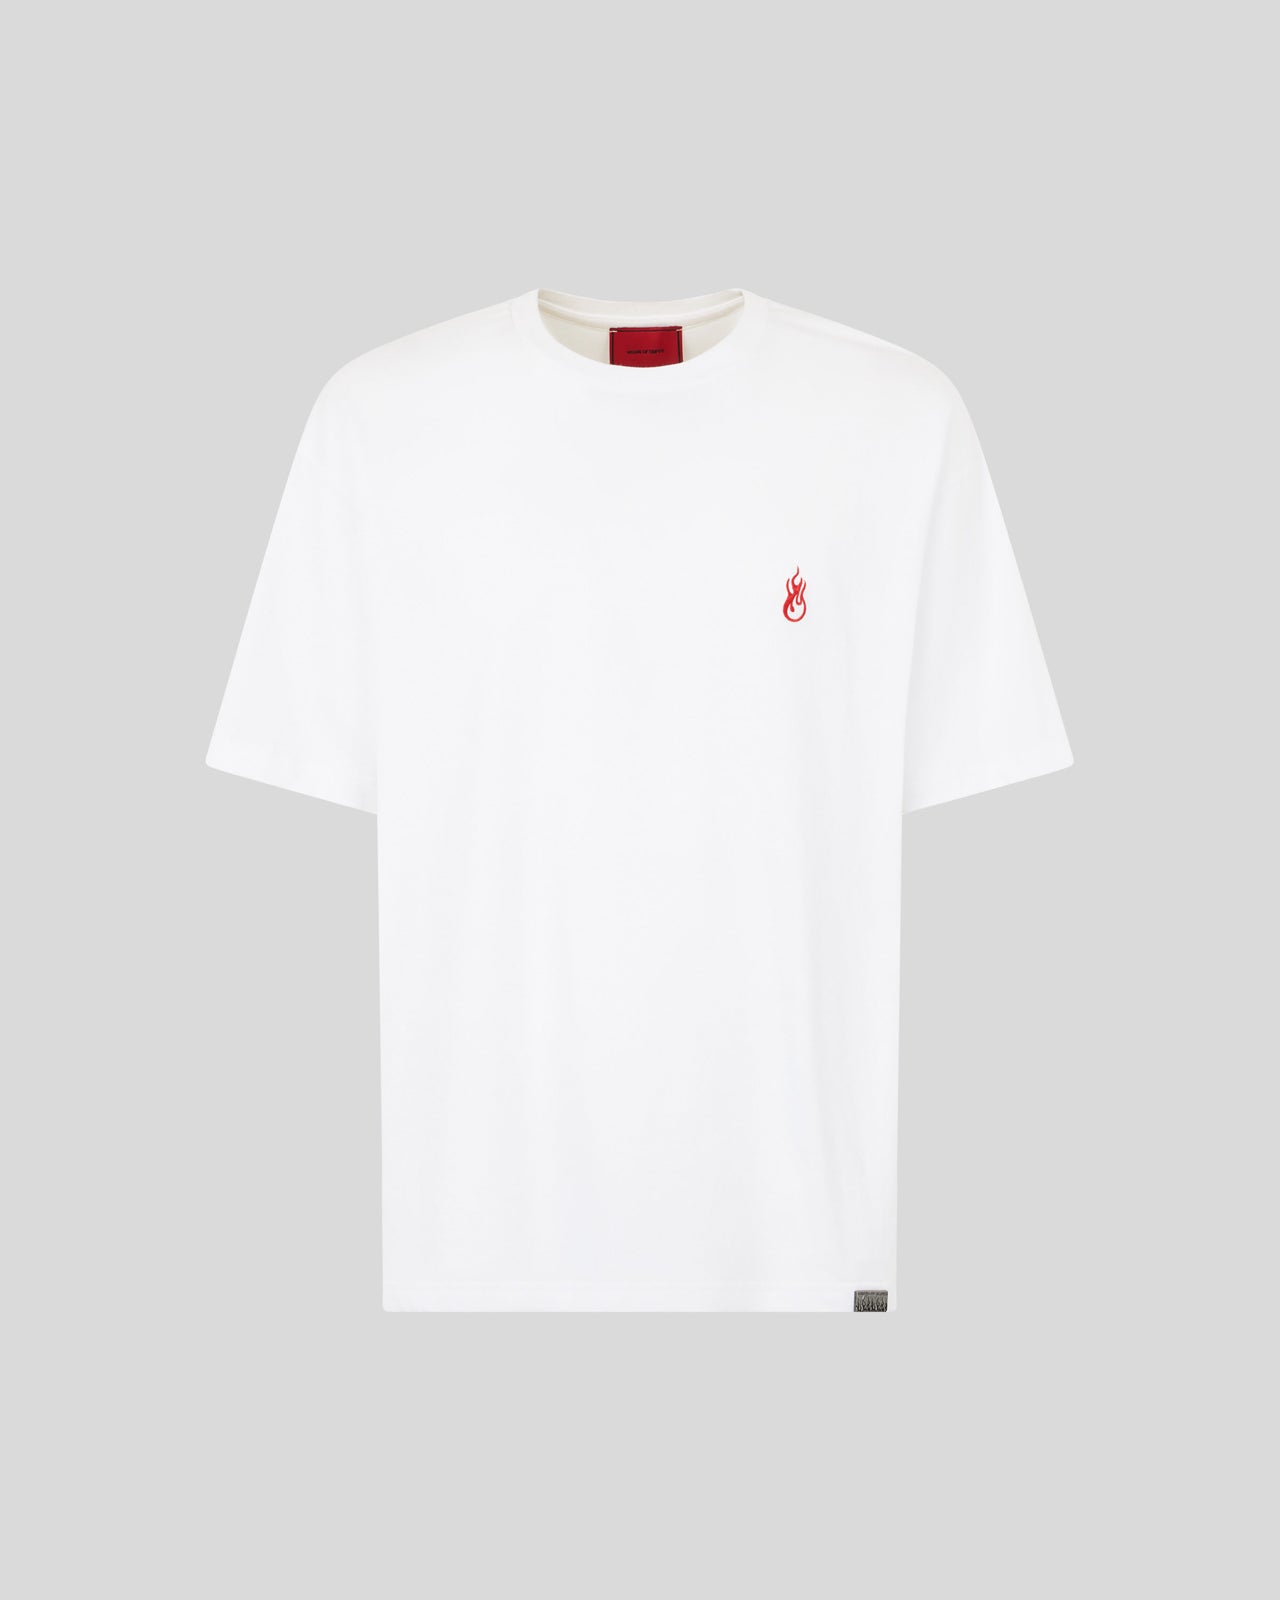 WHITE T-SHIRT WITH FLAMES LOGO